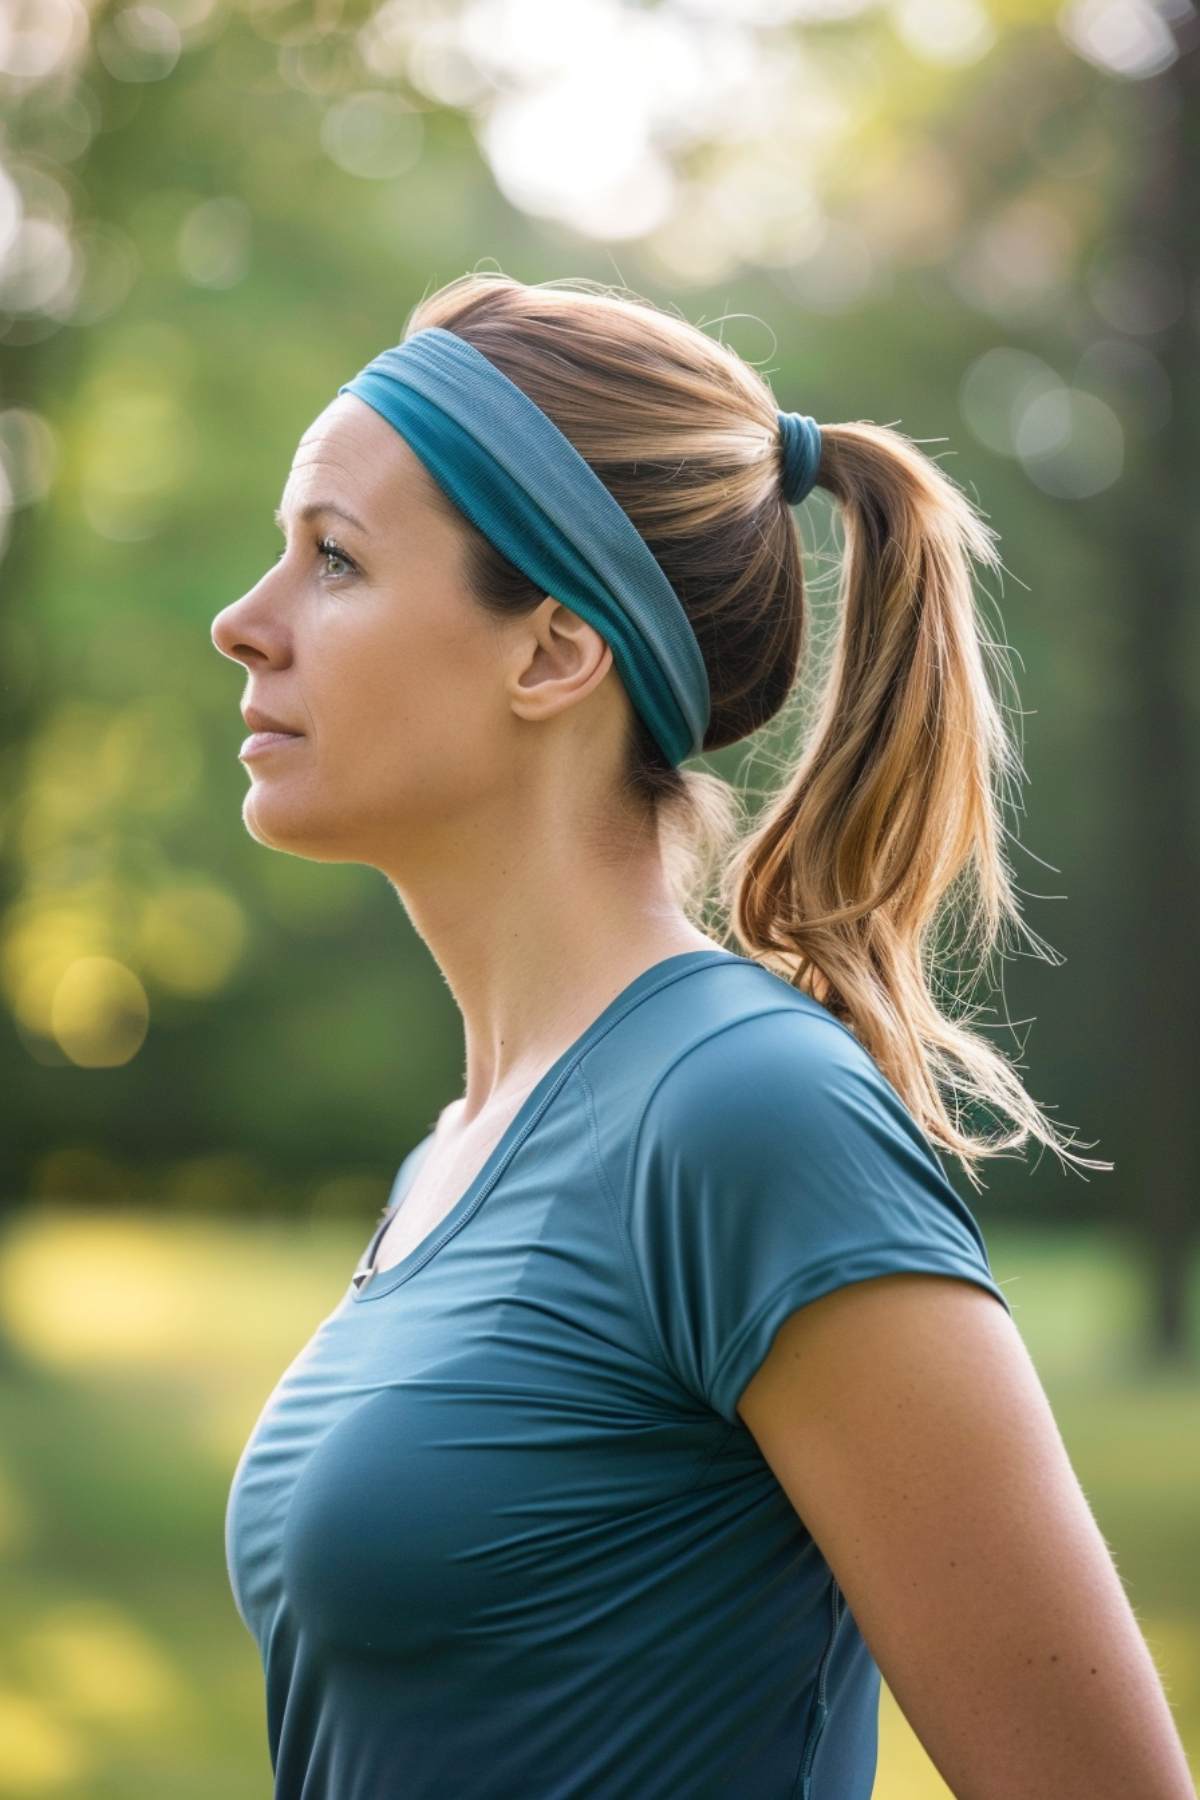 Woman over 40 with a high ponytail and teal headband, combining style and functionality for an active lifestyle.